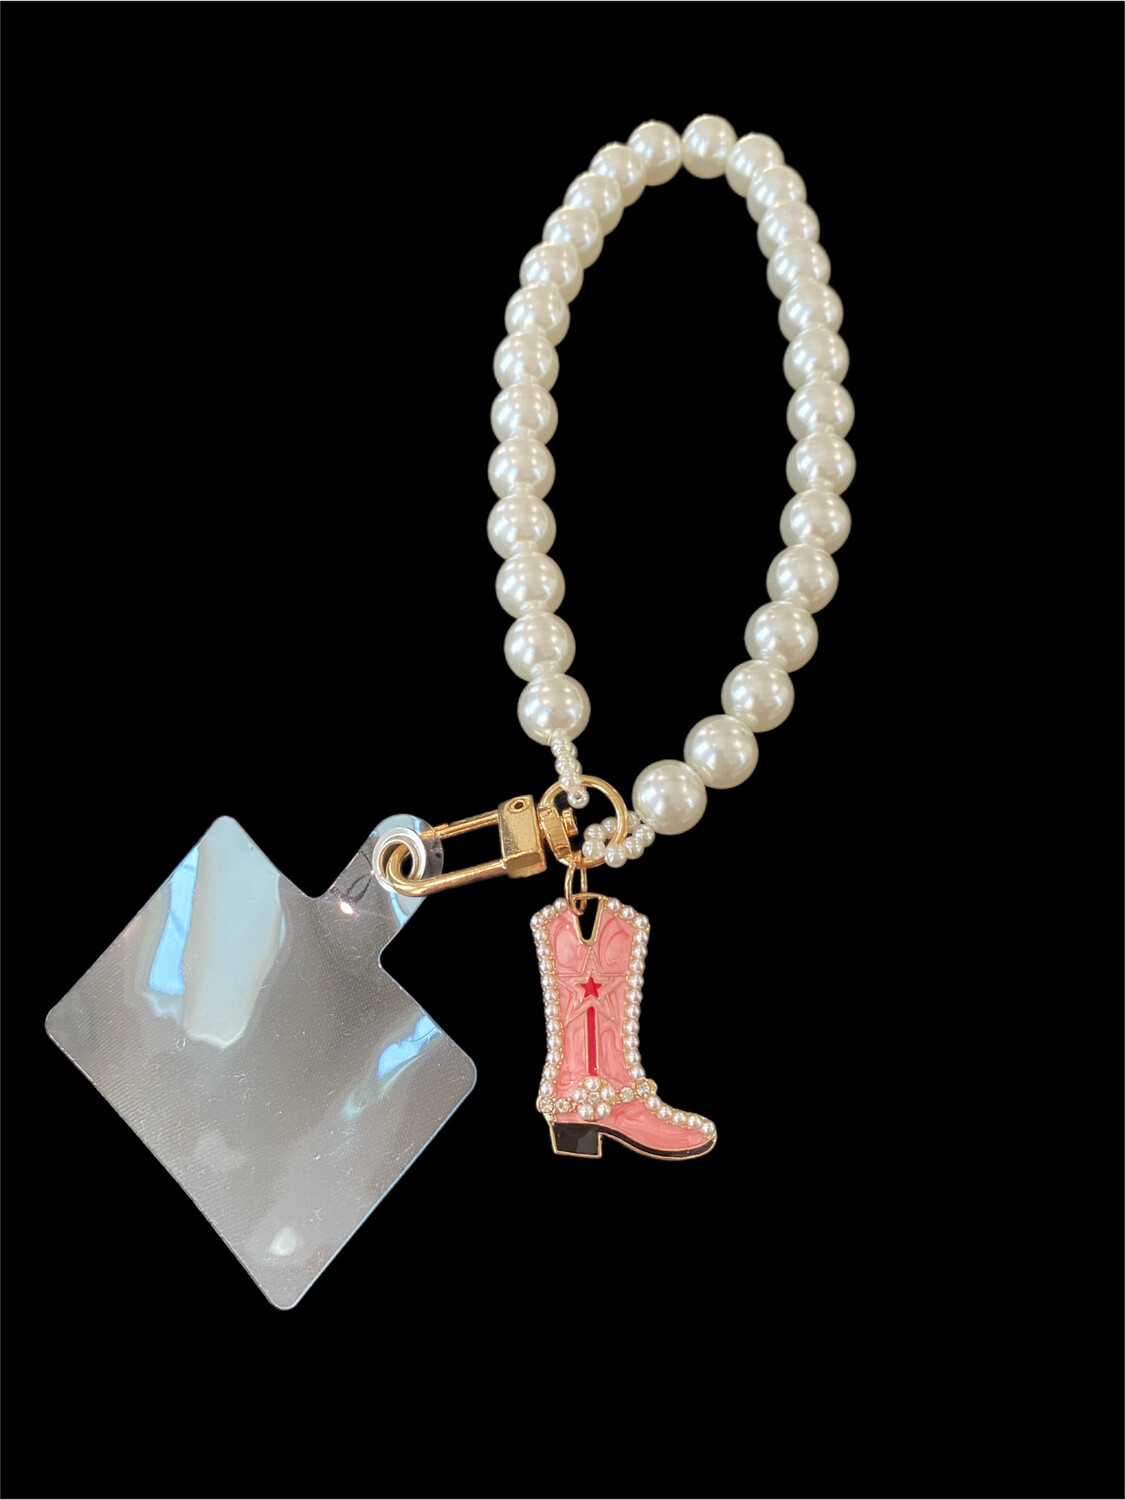 Boots & Pearls Keychain